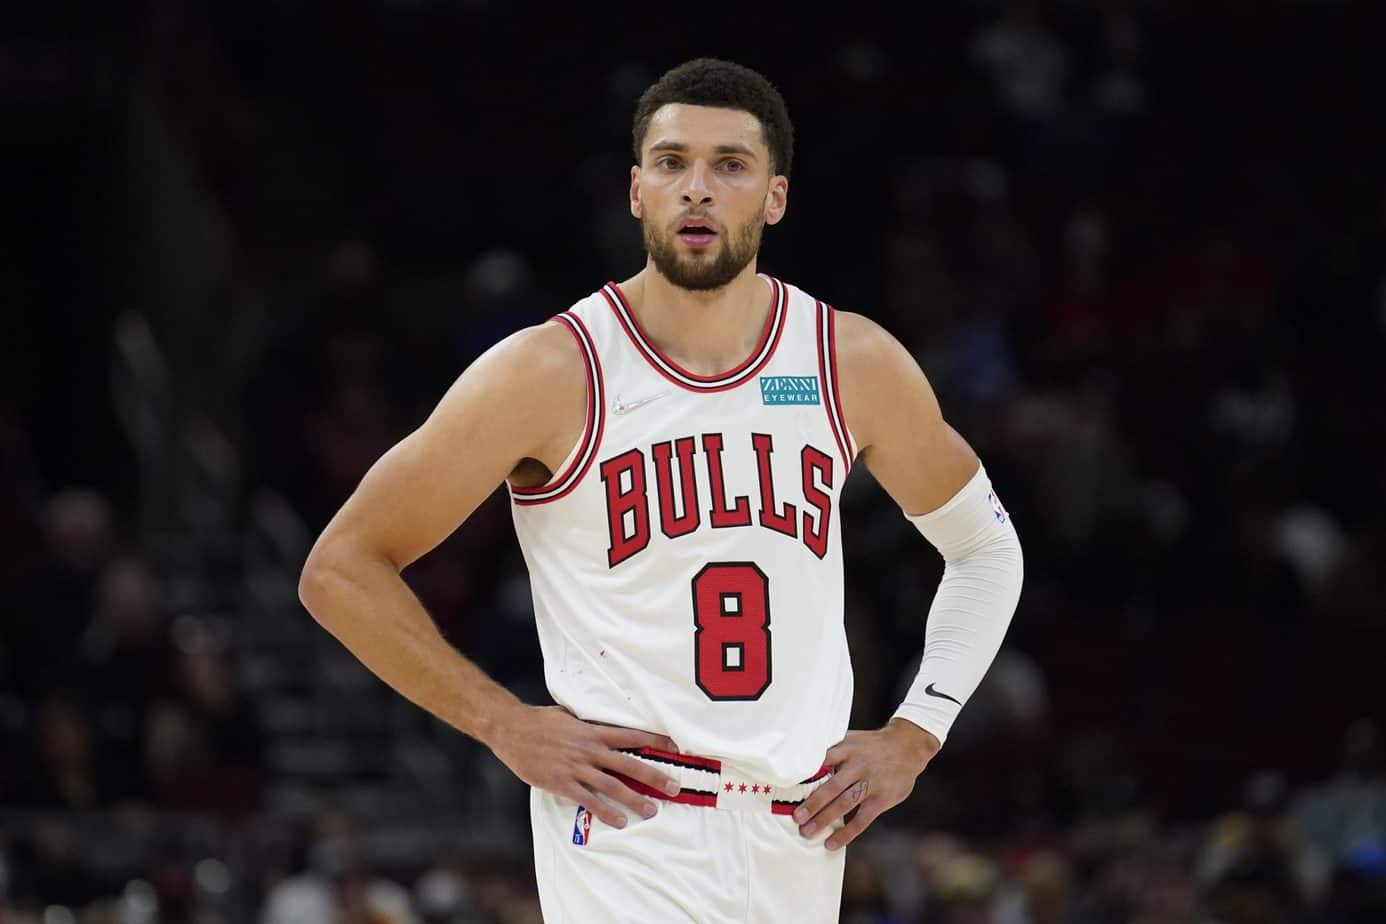 Chicago Bulls star Zach LaVine was non-committal about his future with the team during a recent interview on Draymond Green's podcast